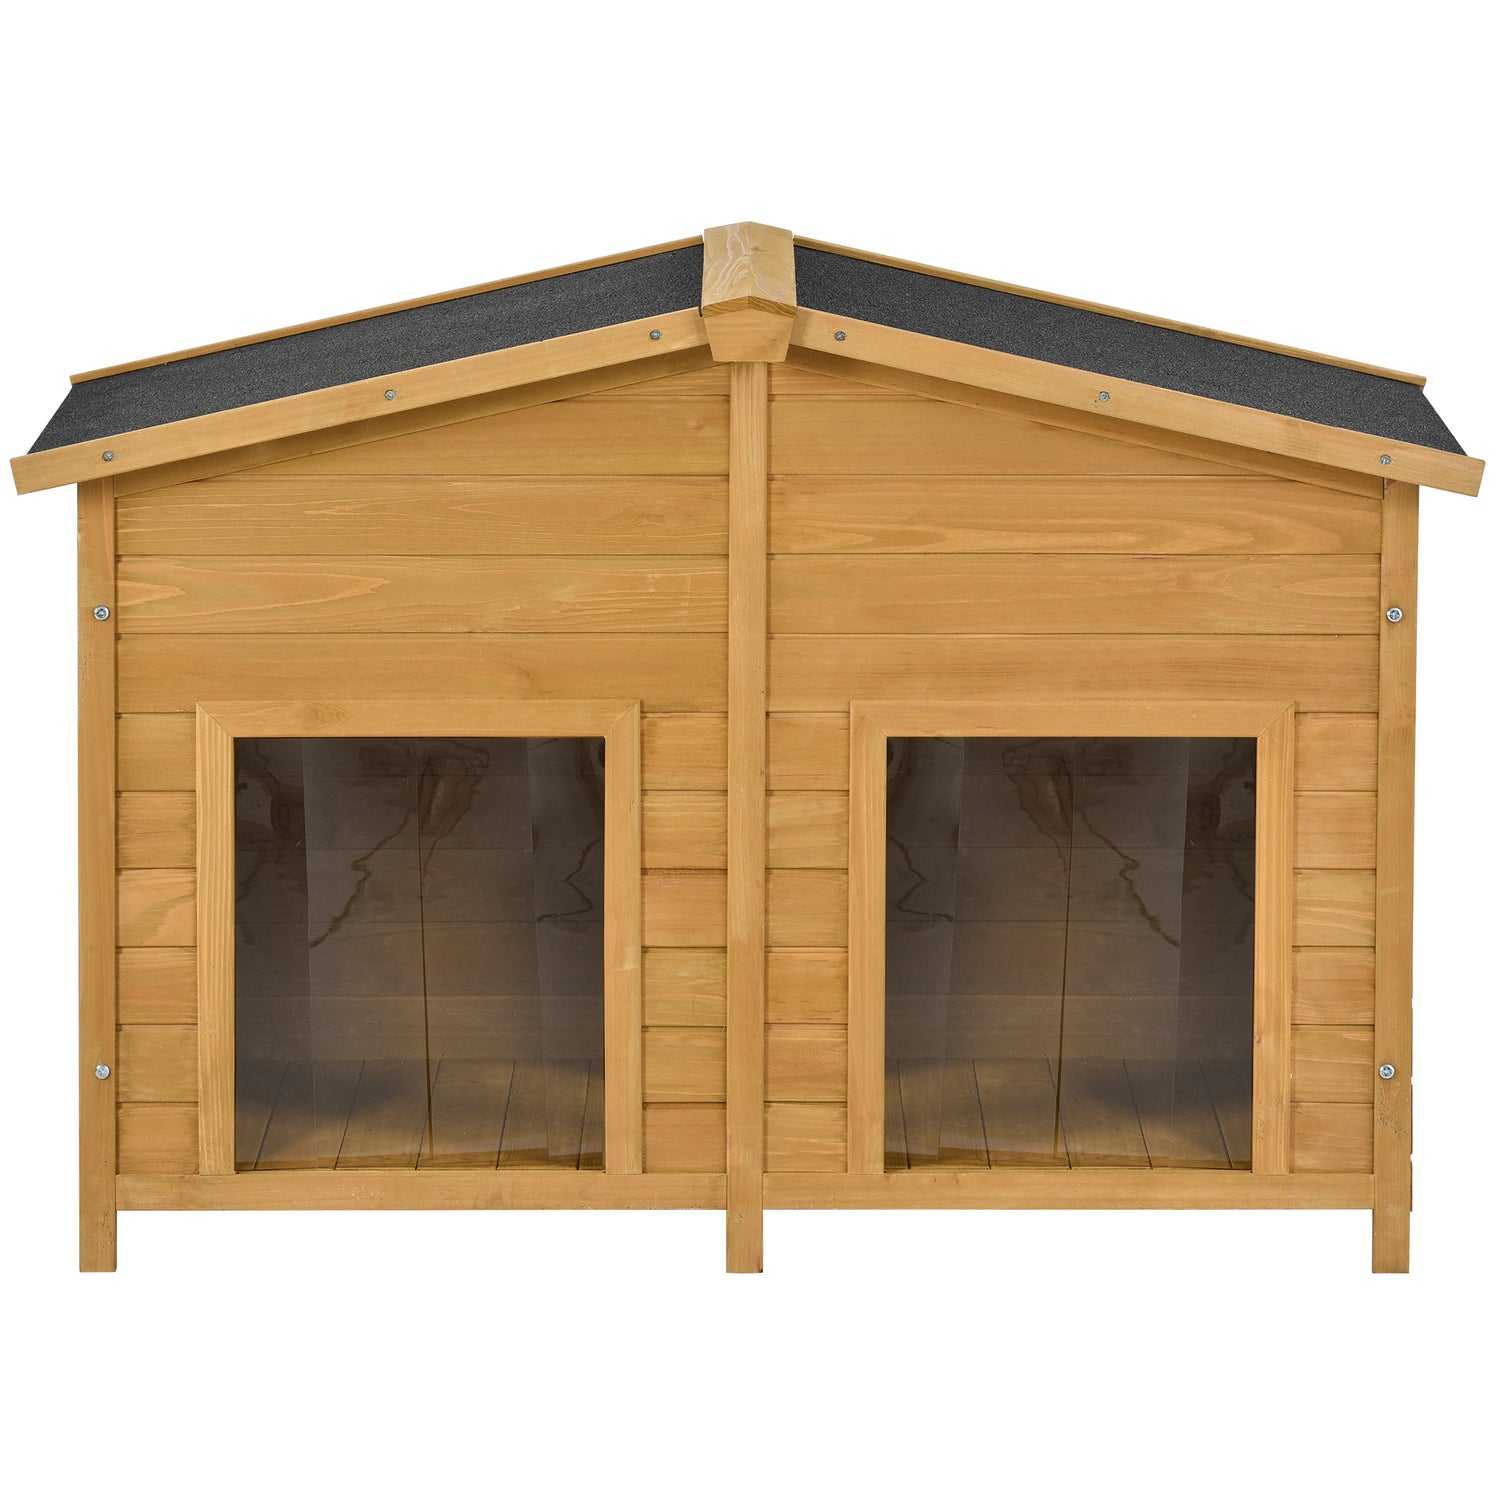 Atotoa 47.2" Large Wooden Dog House Outdoor, Outdoor & Indoor Dog Crate, Cabin Style, with Porch, 2 Doors